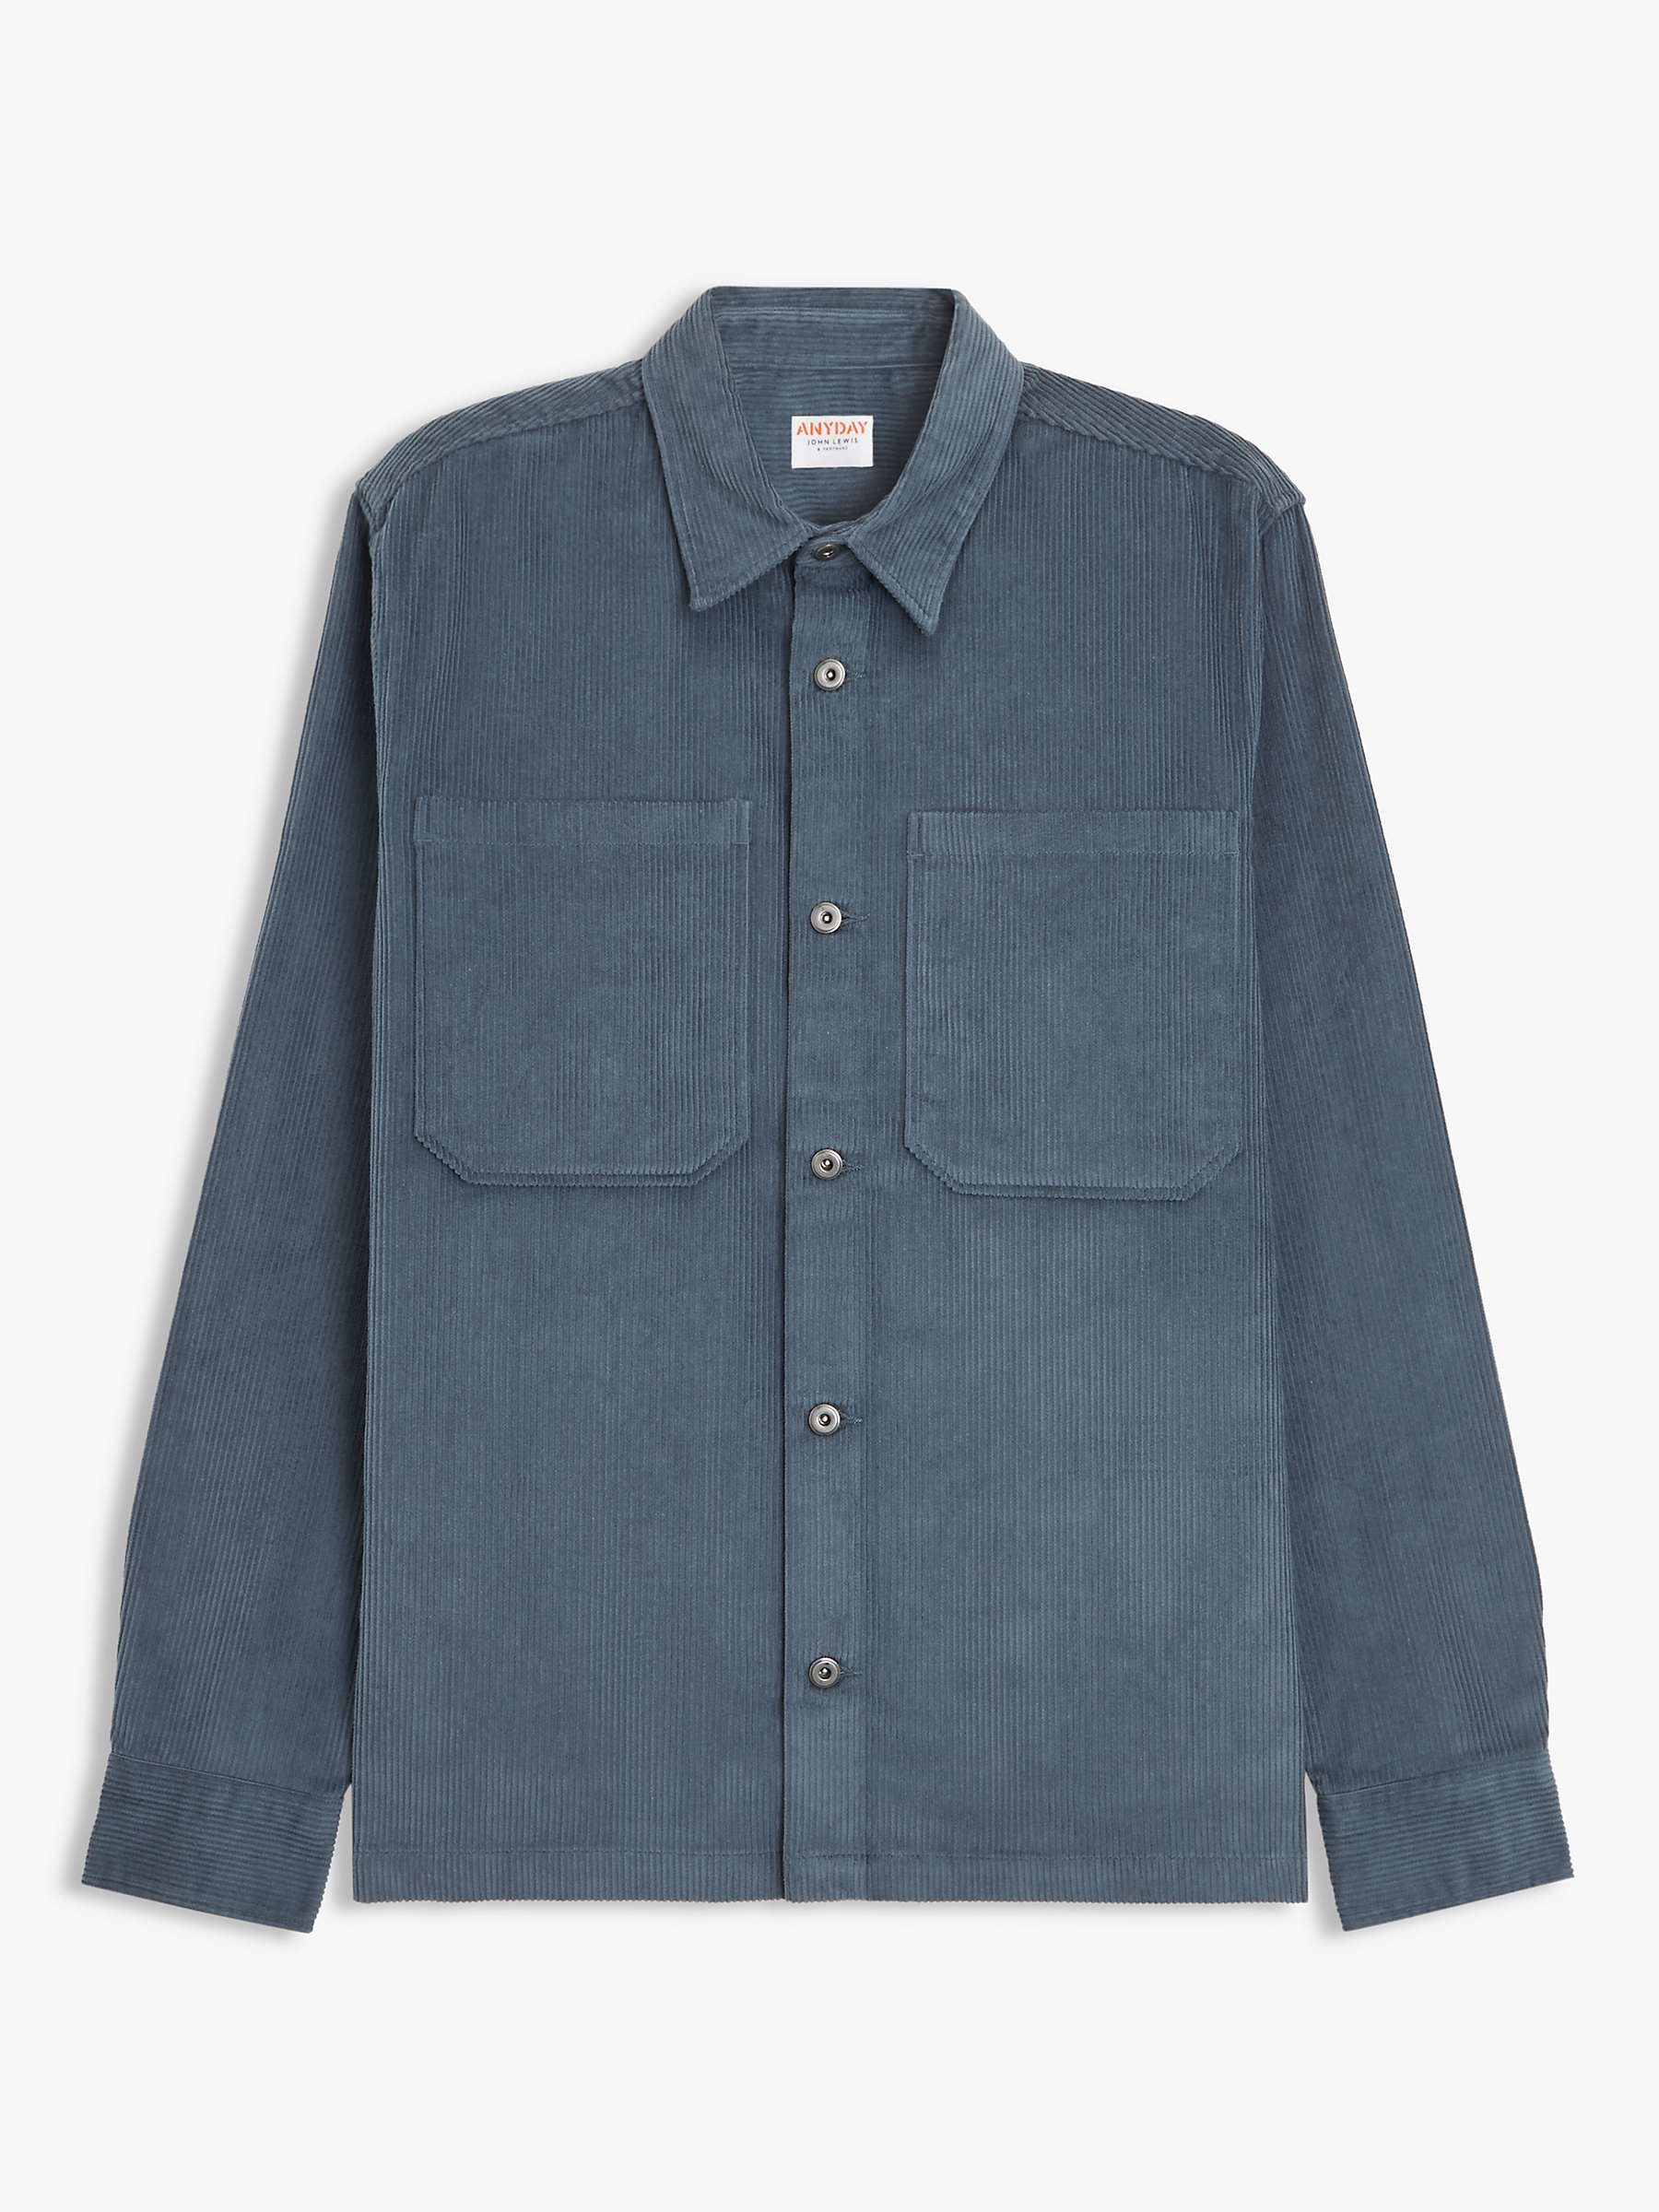 John Lewis ANYDAY Cord Overshirt, Stormy Weather at John Lewis & Partners